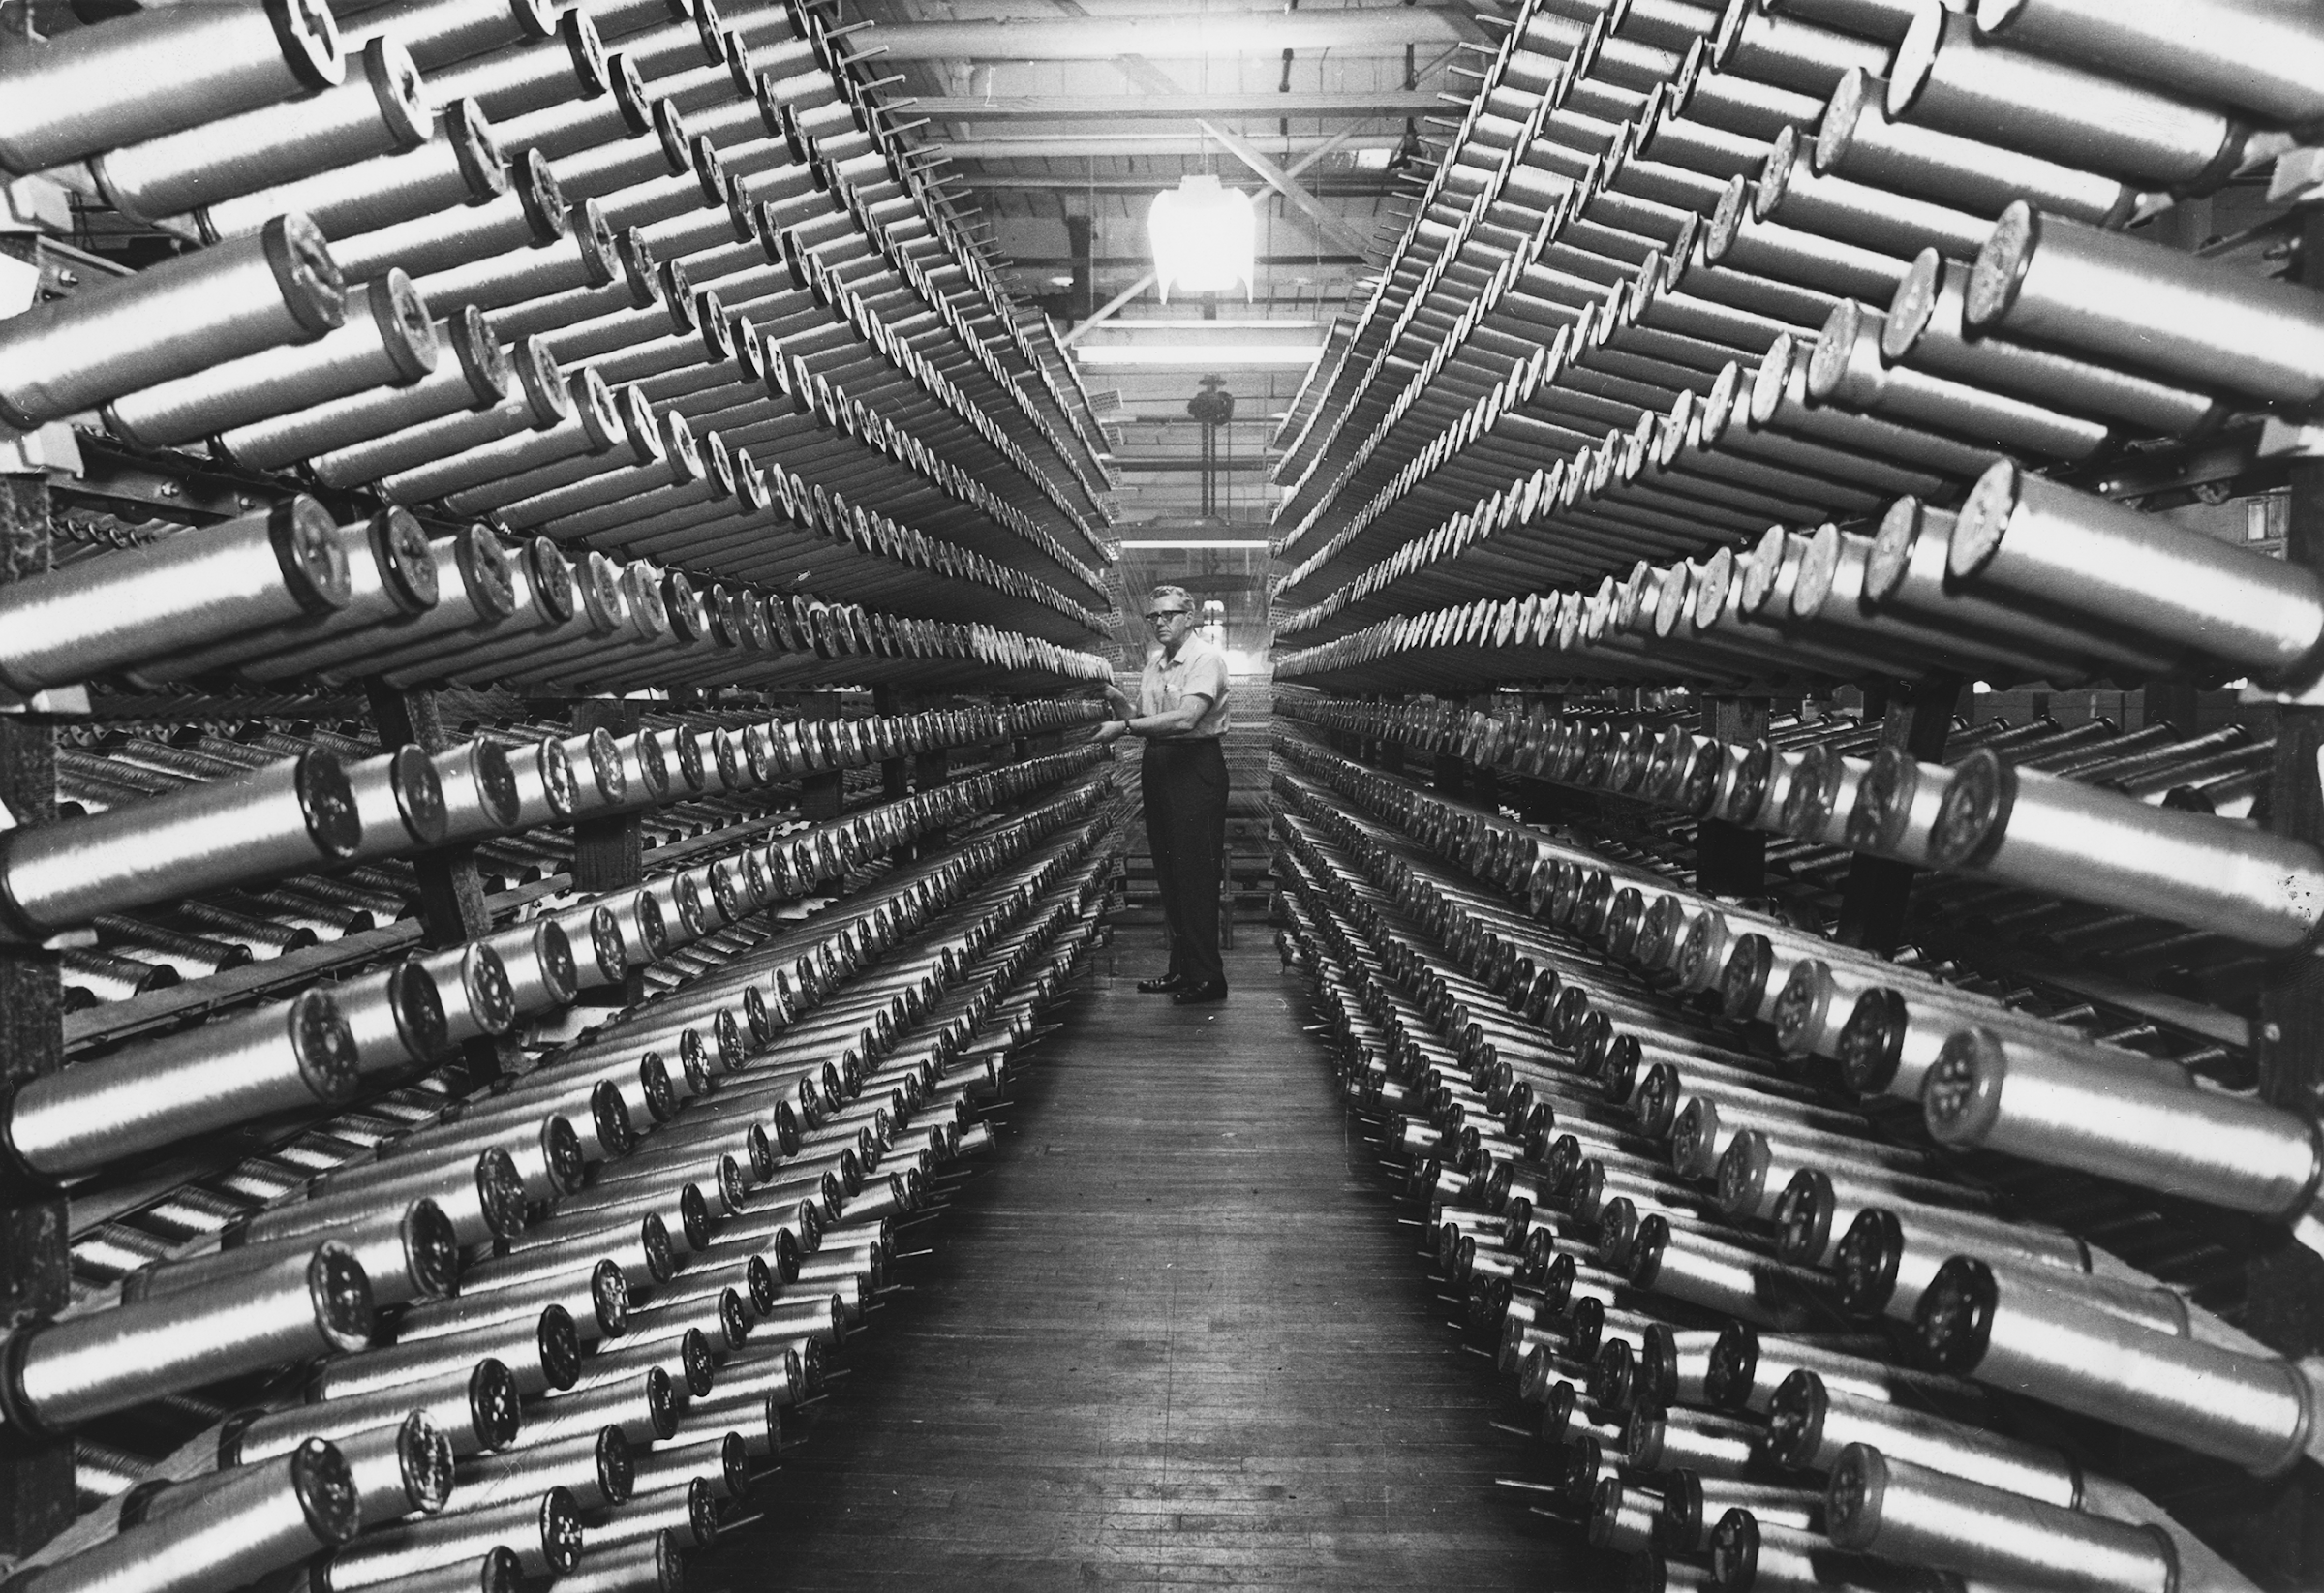 Photo of a Man between rows of spools